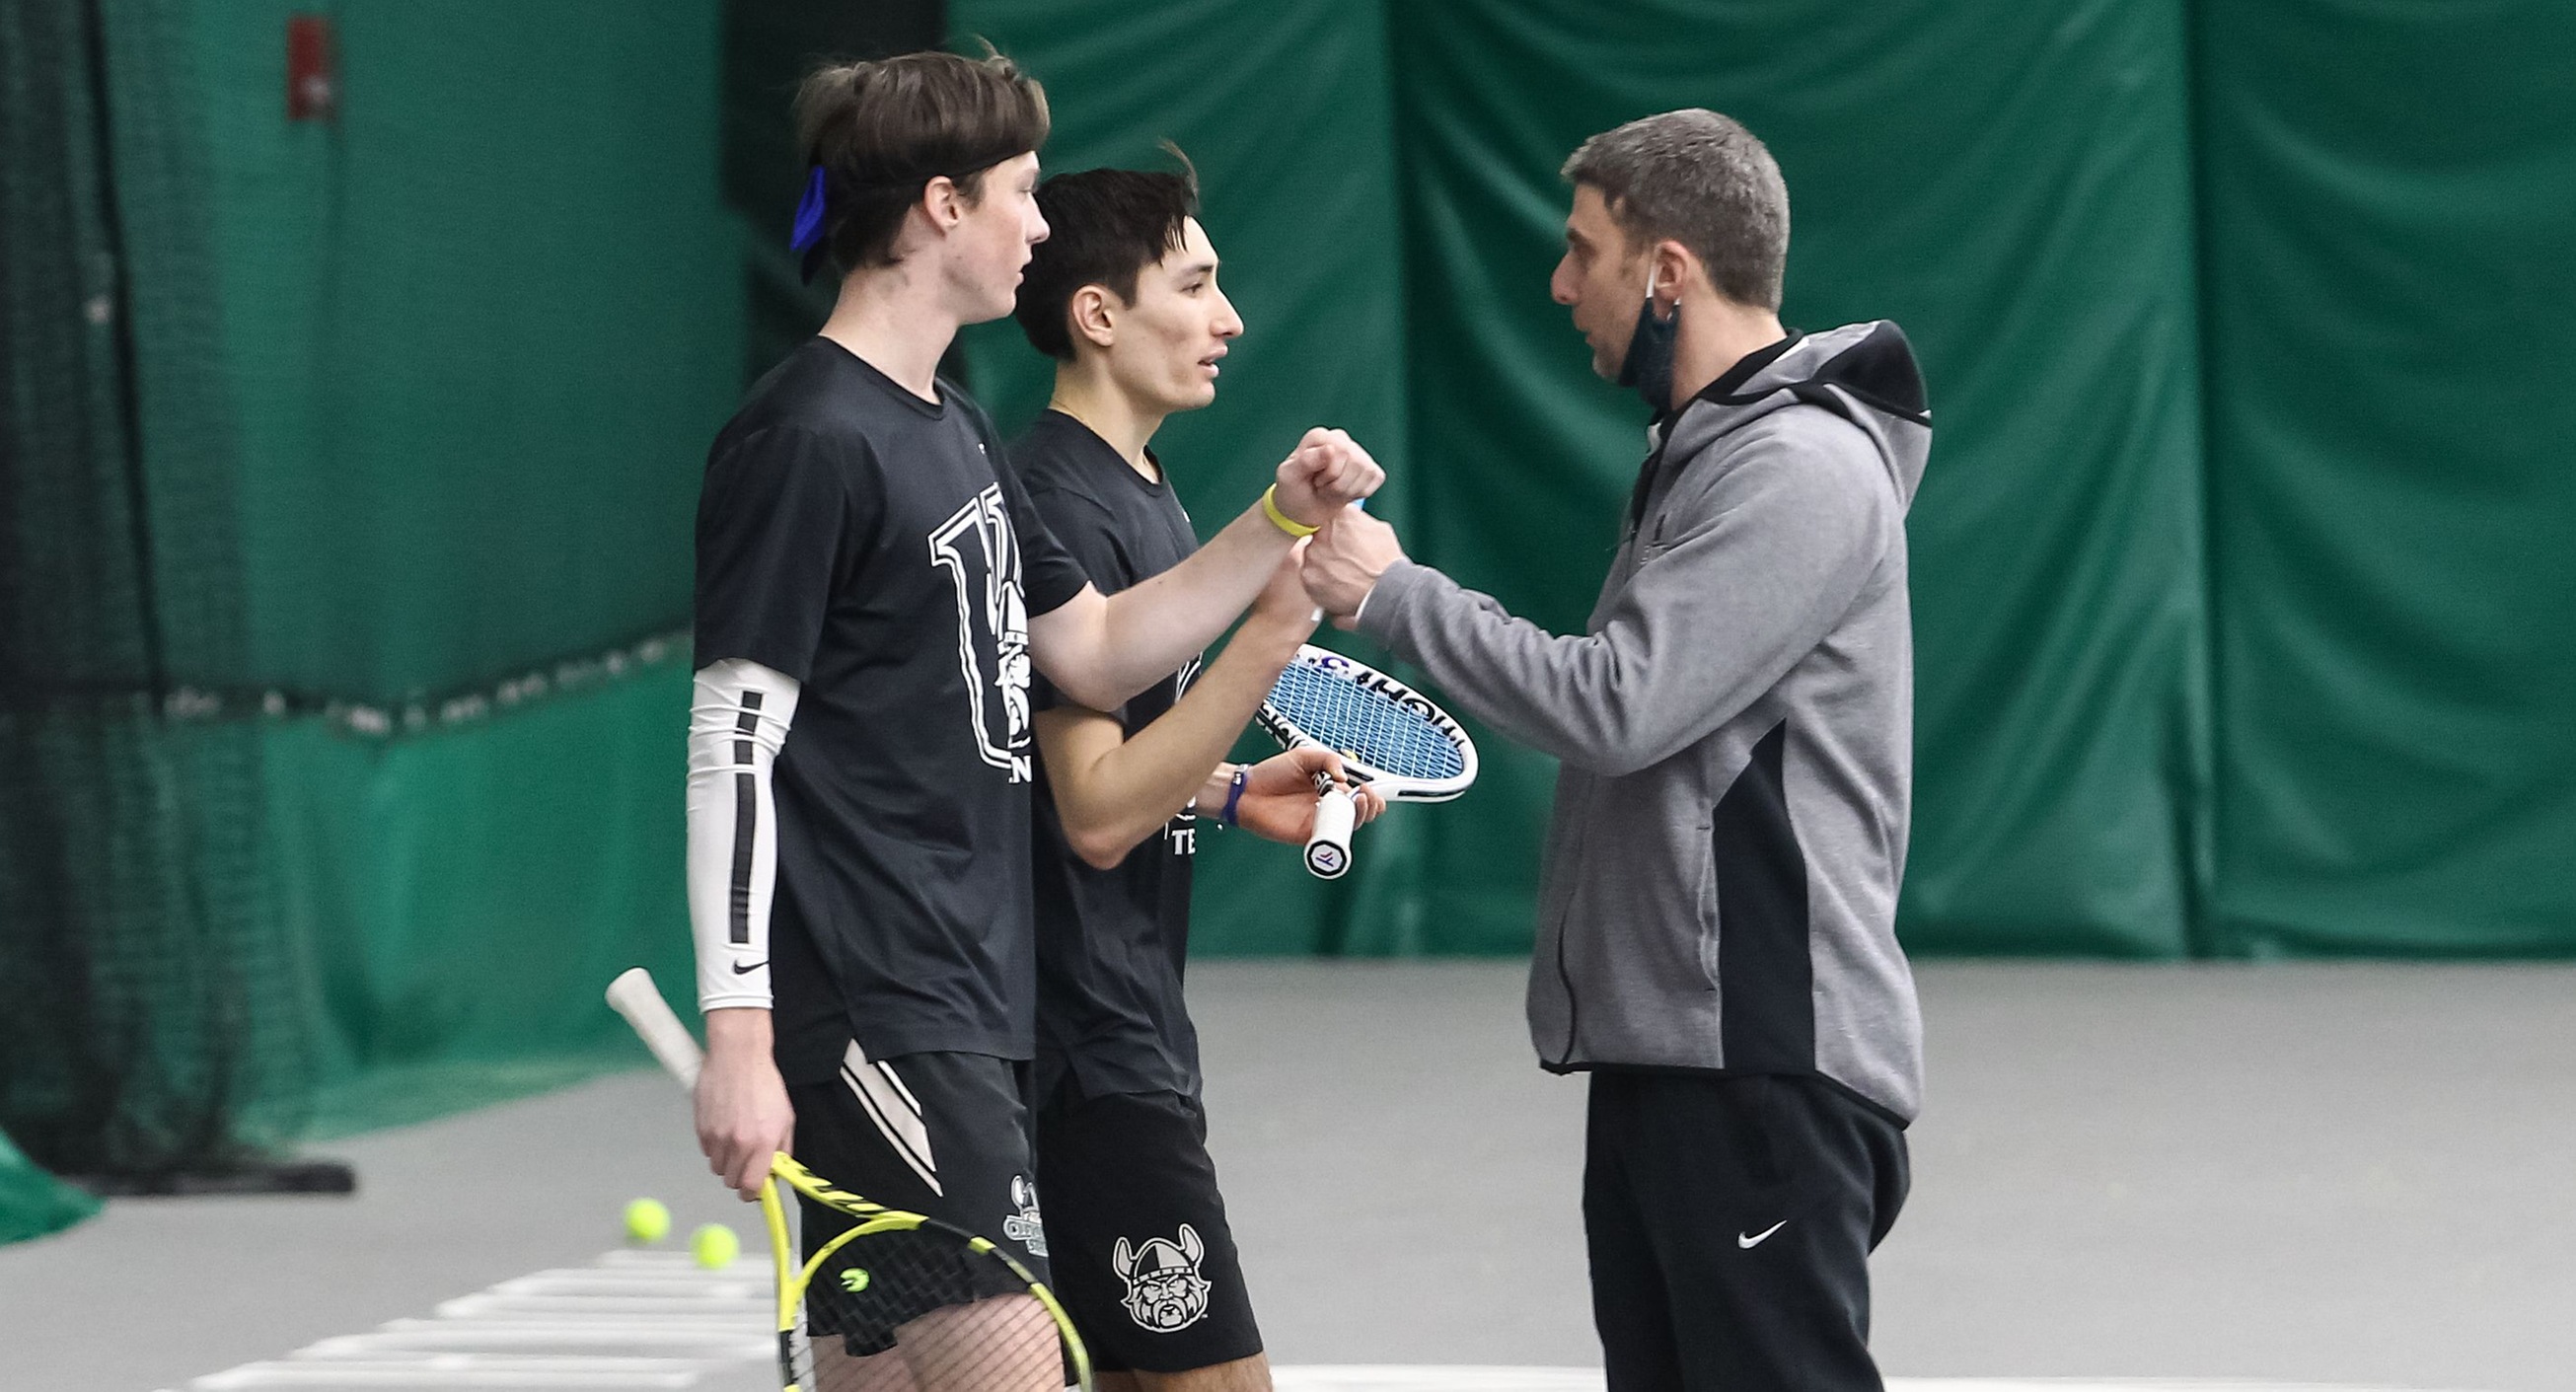 Cleveland State Men’s Tennis Sweeps #HLTennis Weekly Awards